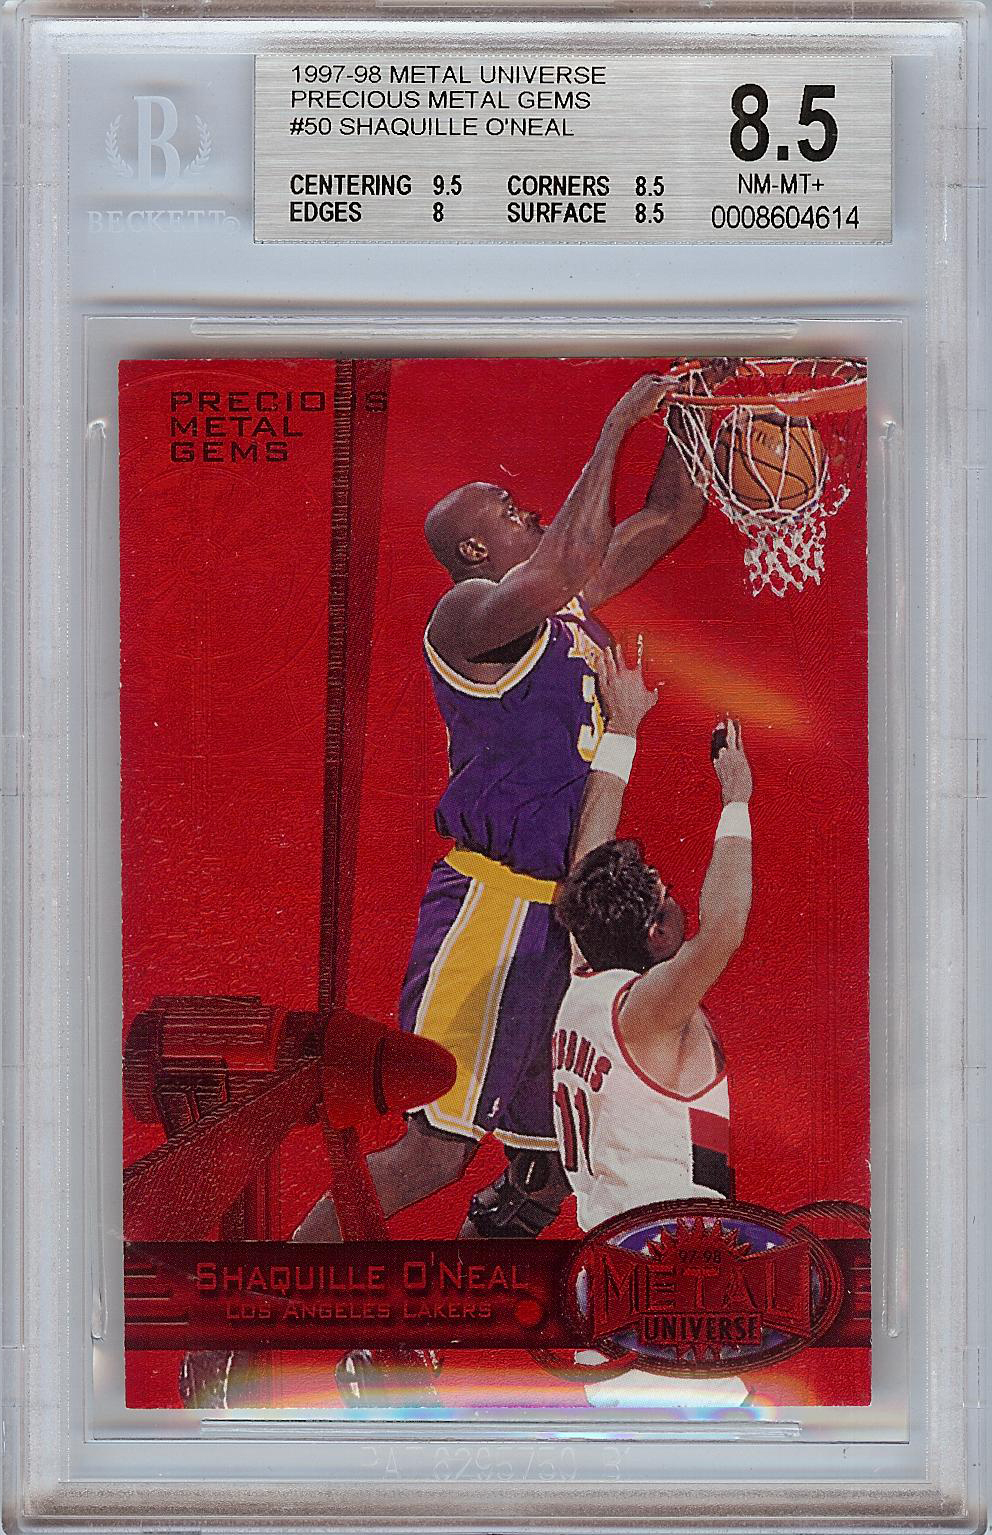 Shaquille O'Neal picture 3 in Lakers Universe.